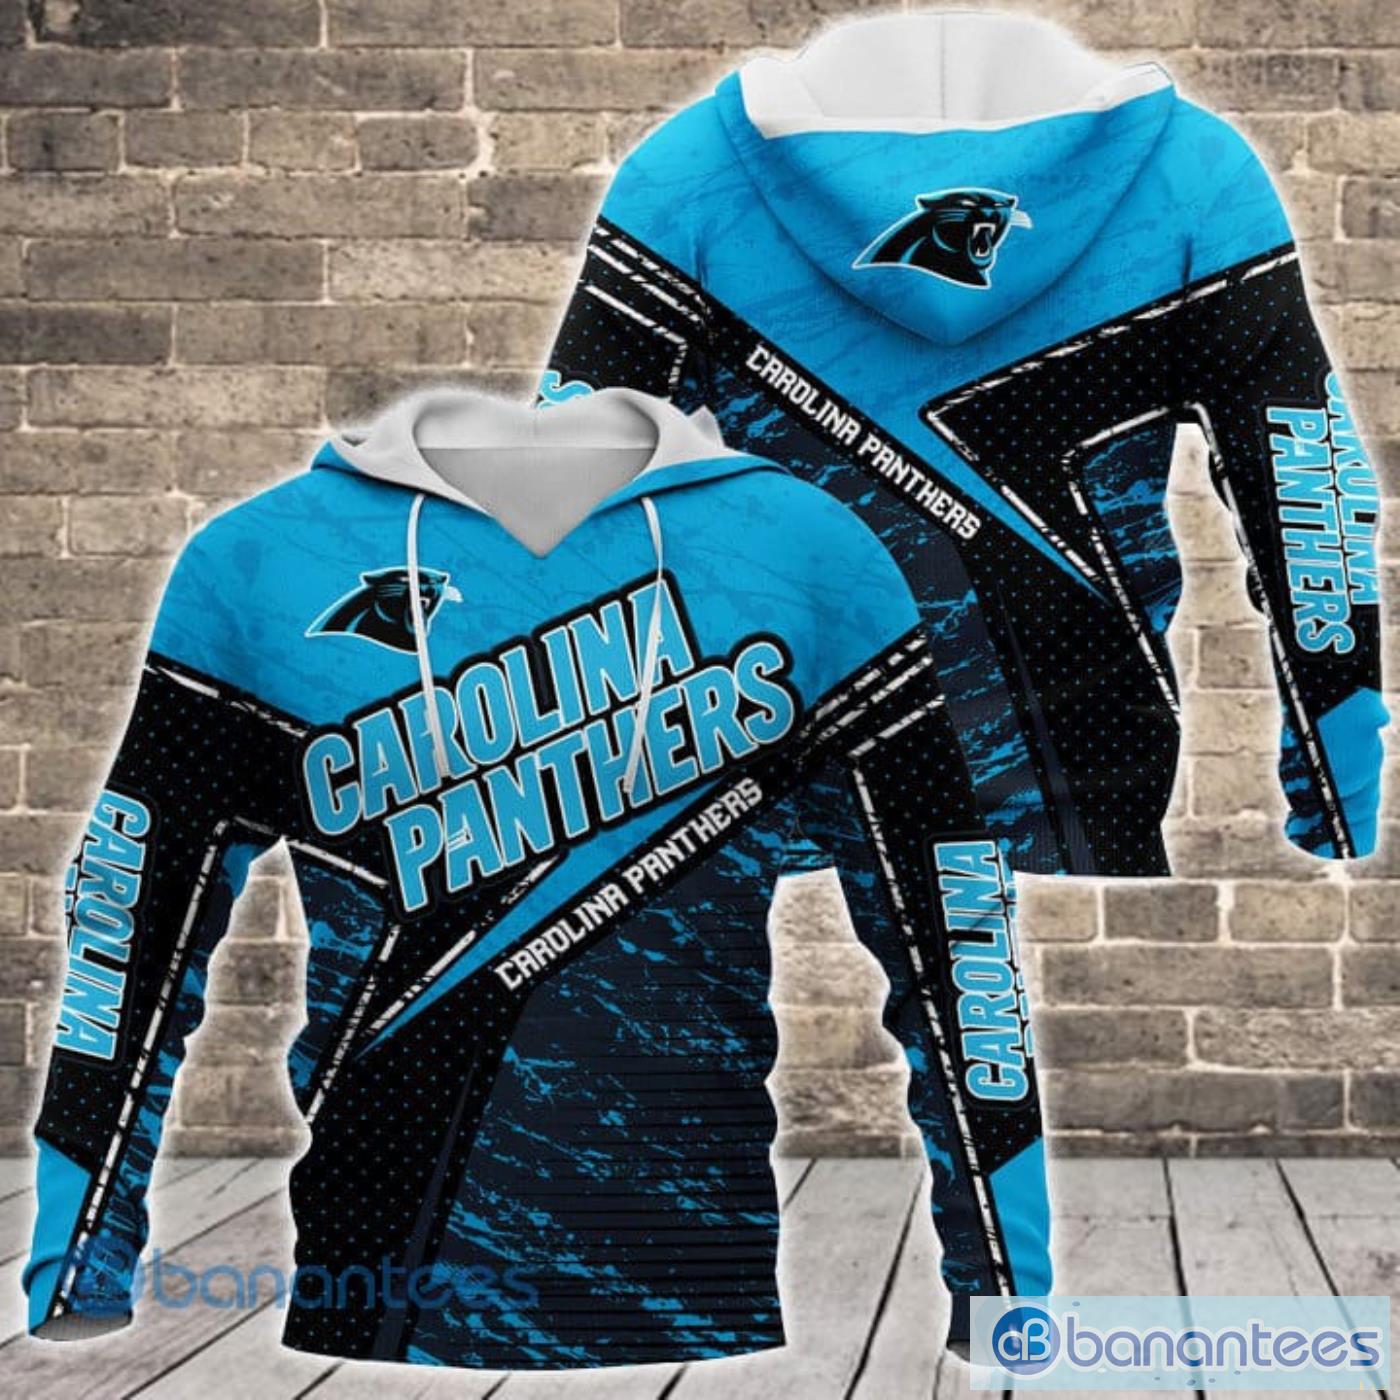 Carolina Panthers Nfl All Over Printed 3D Shirt For Fans Product Photo 1